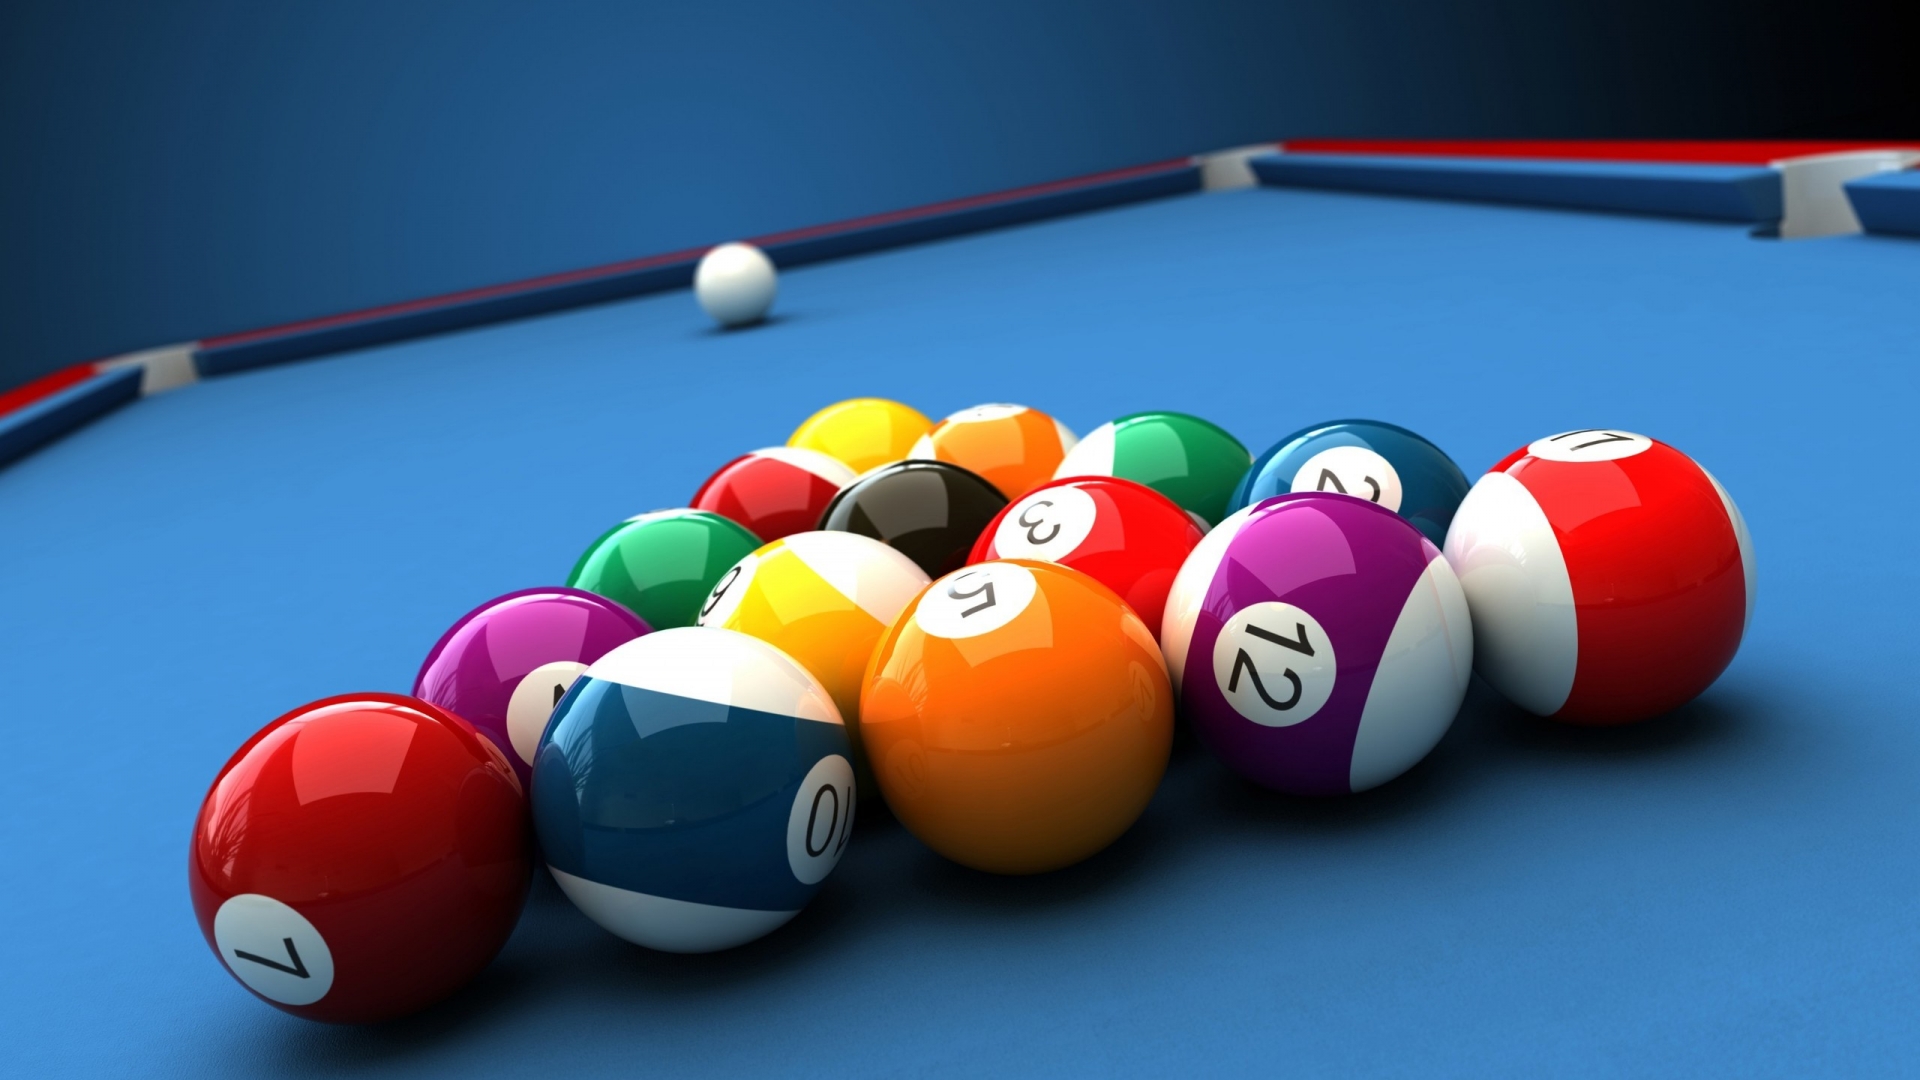 Billiards Table and Balls for 1920 x 1080 HDTV 1080p resolution